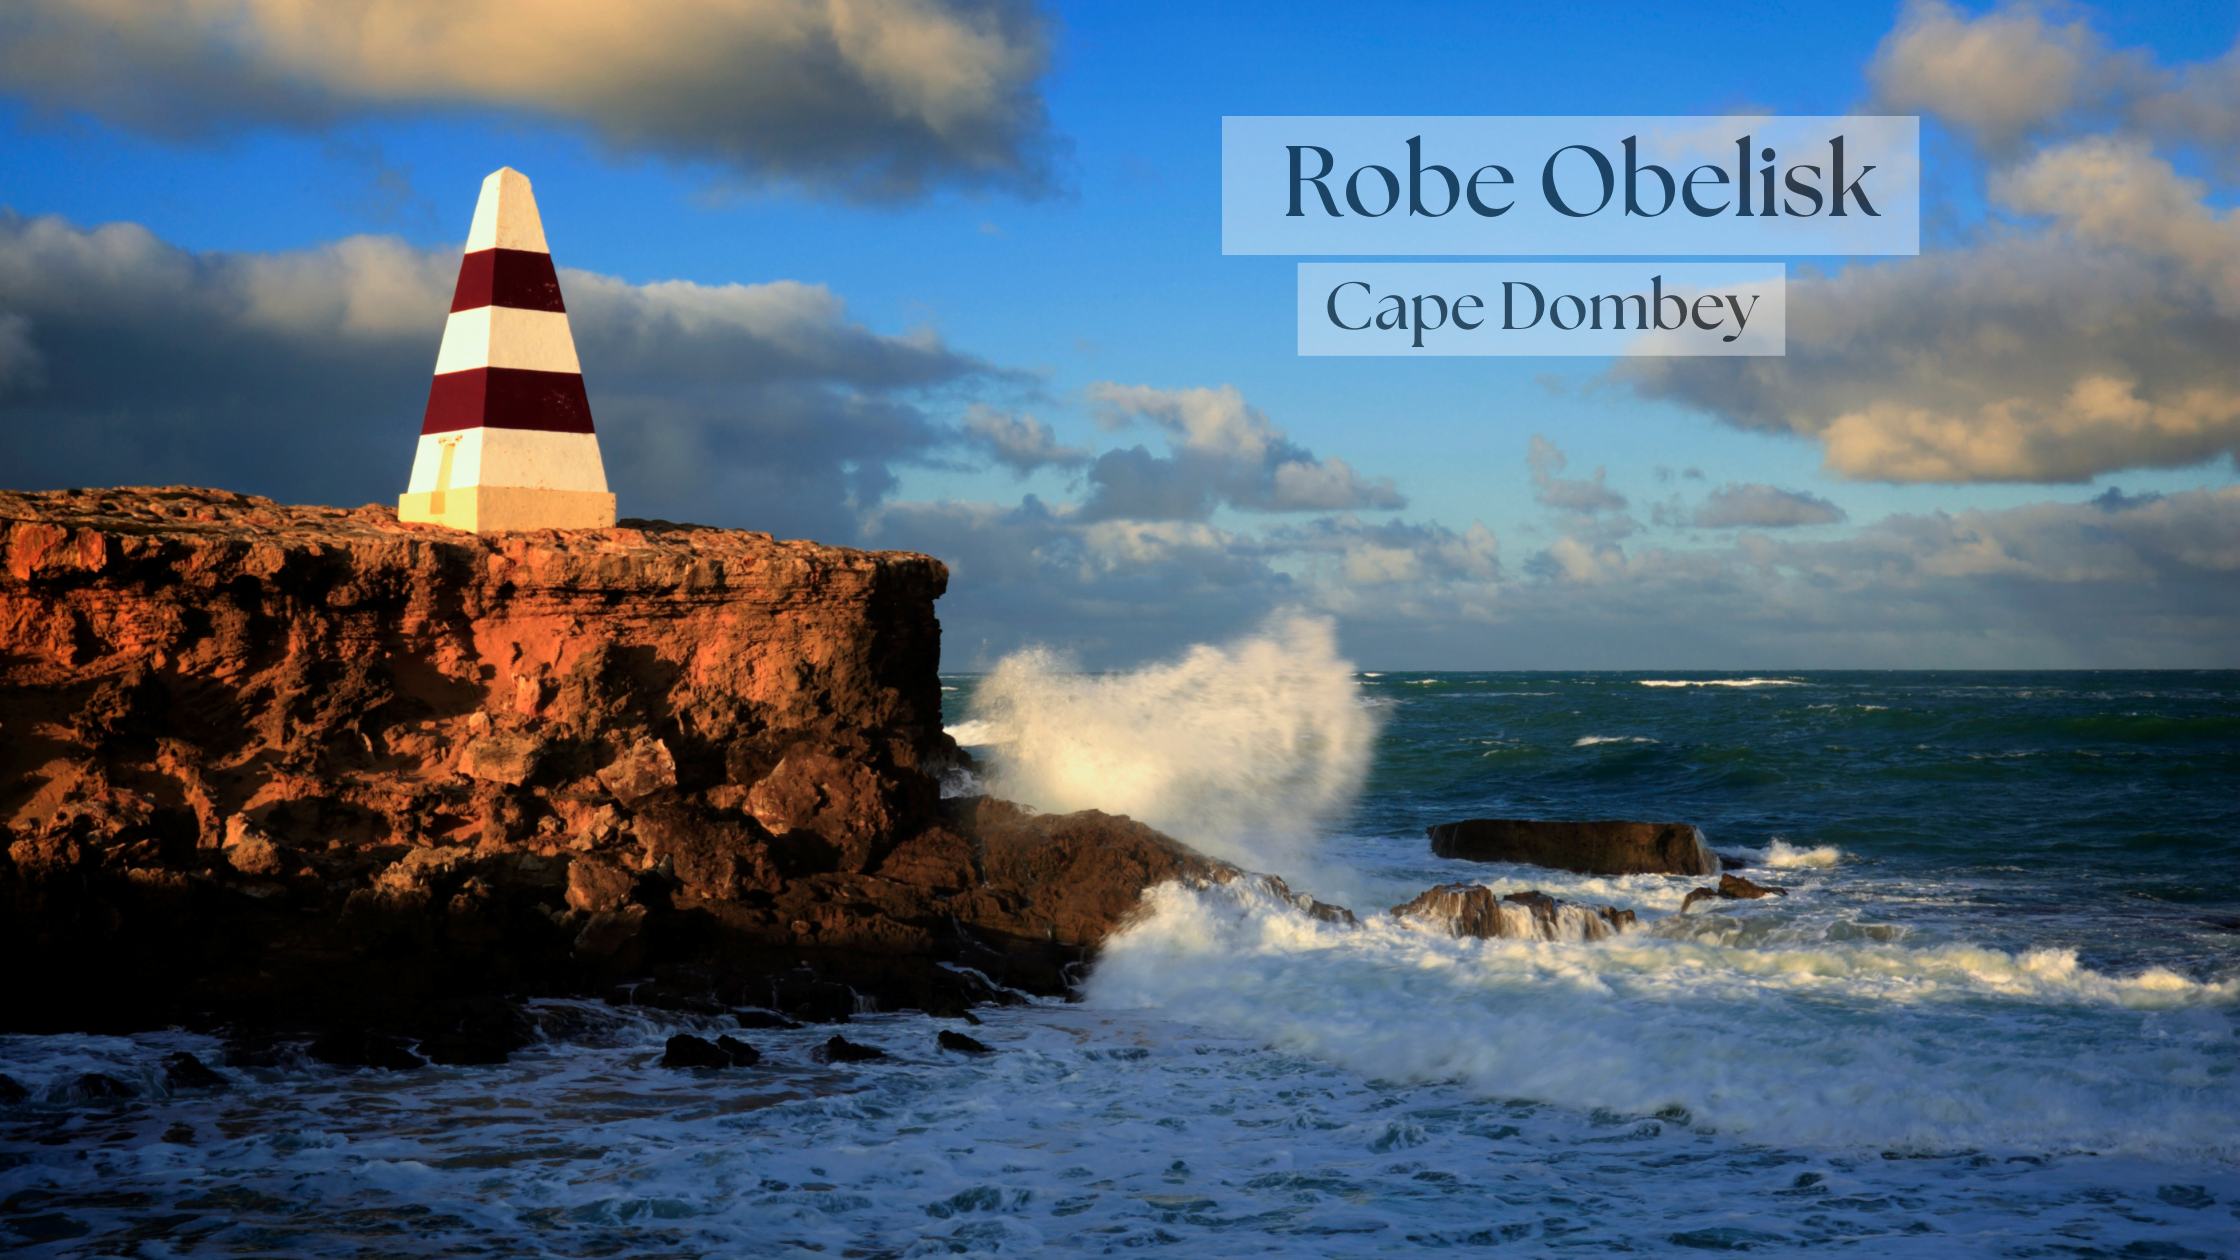 Cape Dombey